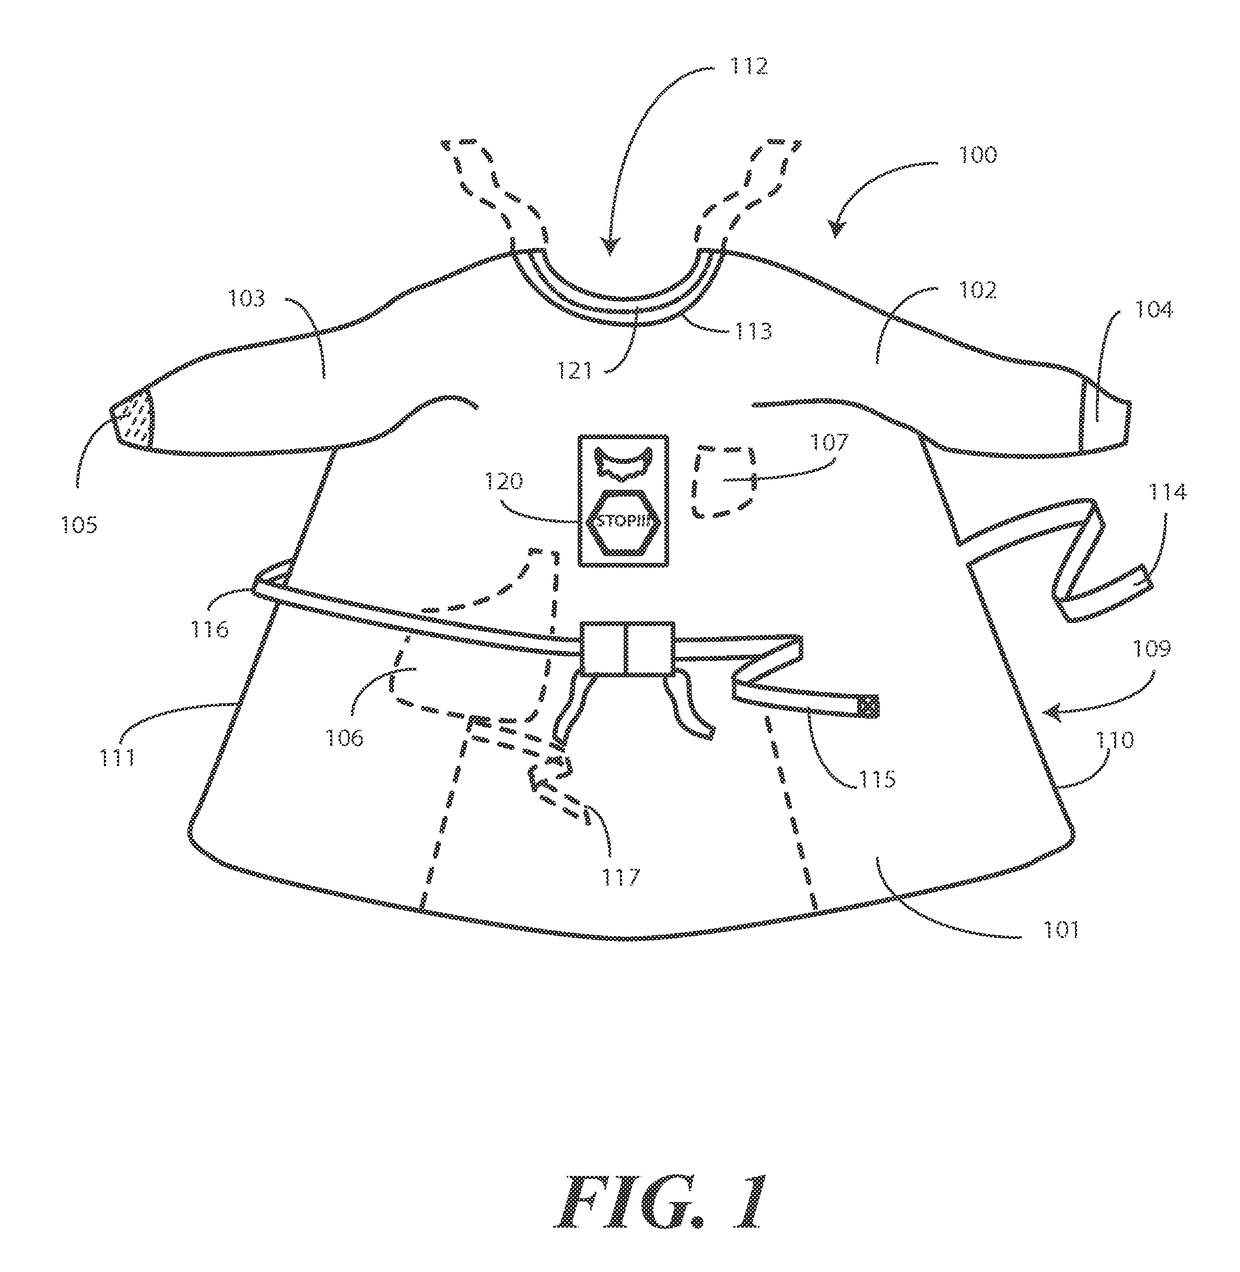 Surgical gown configured for prevention of improper medical procedures